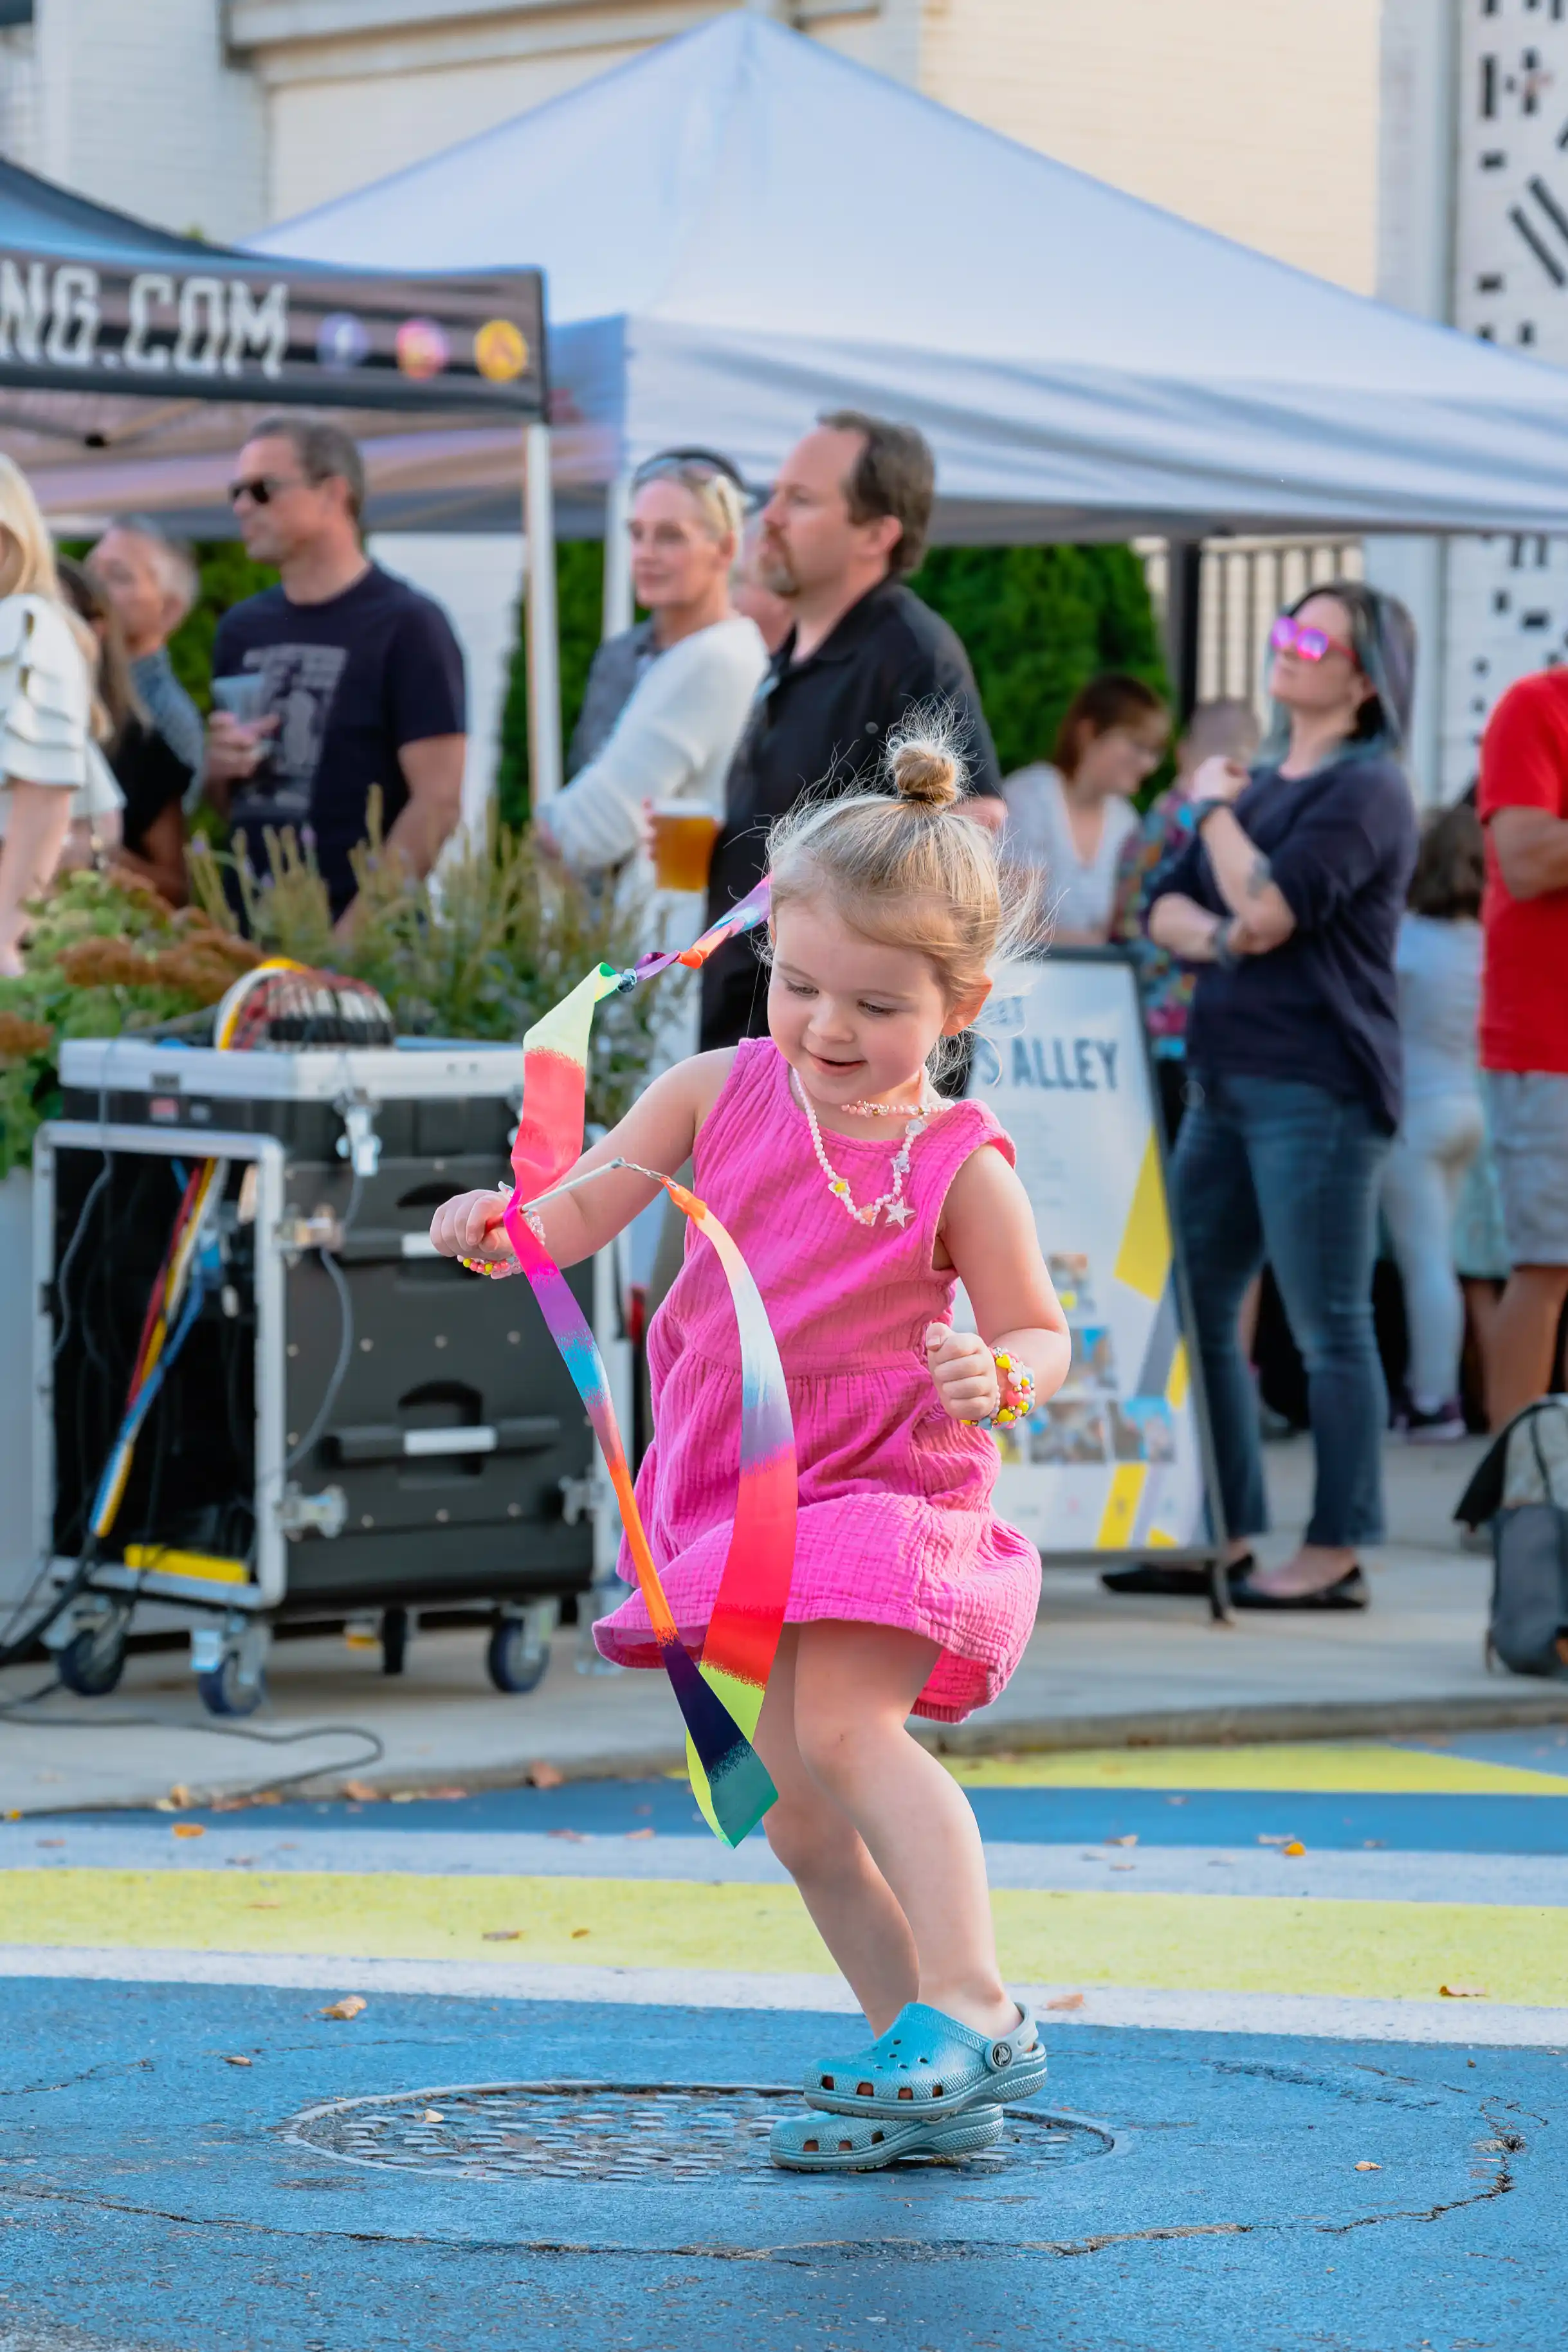 A young girl in a pink dress playfully dancing with colorful ribbons at a street festival with onlookers in the background.